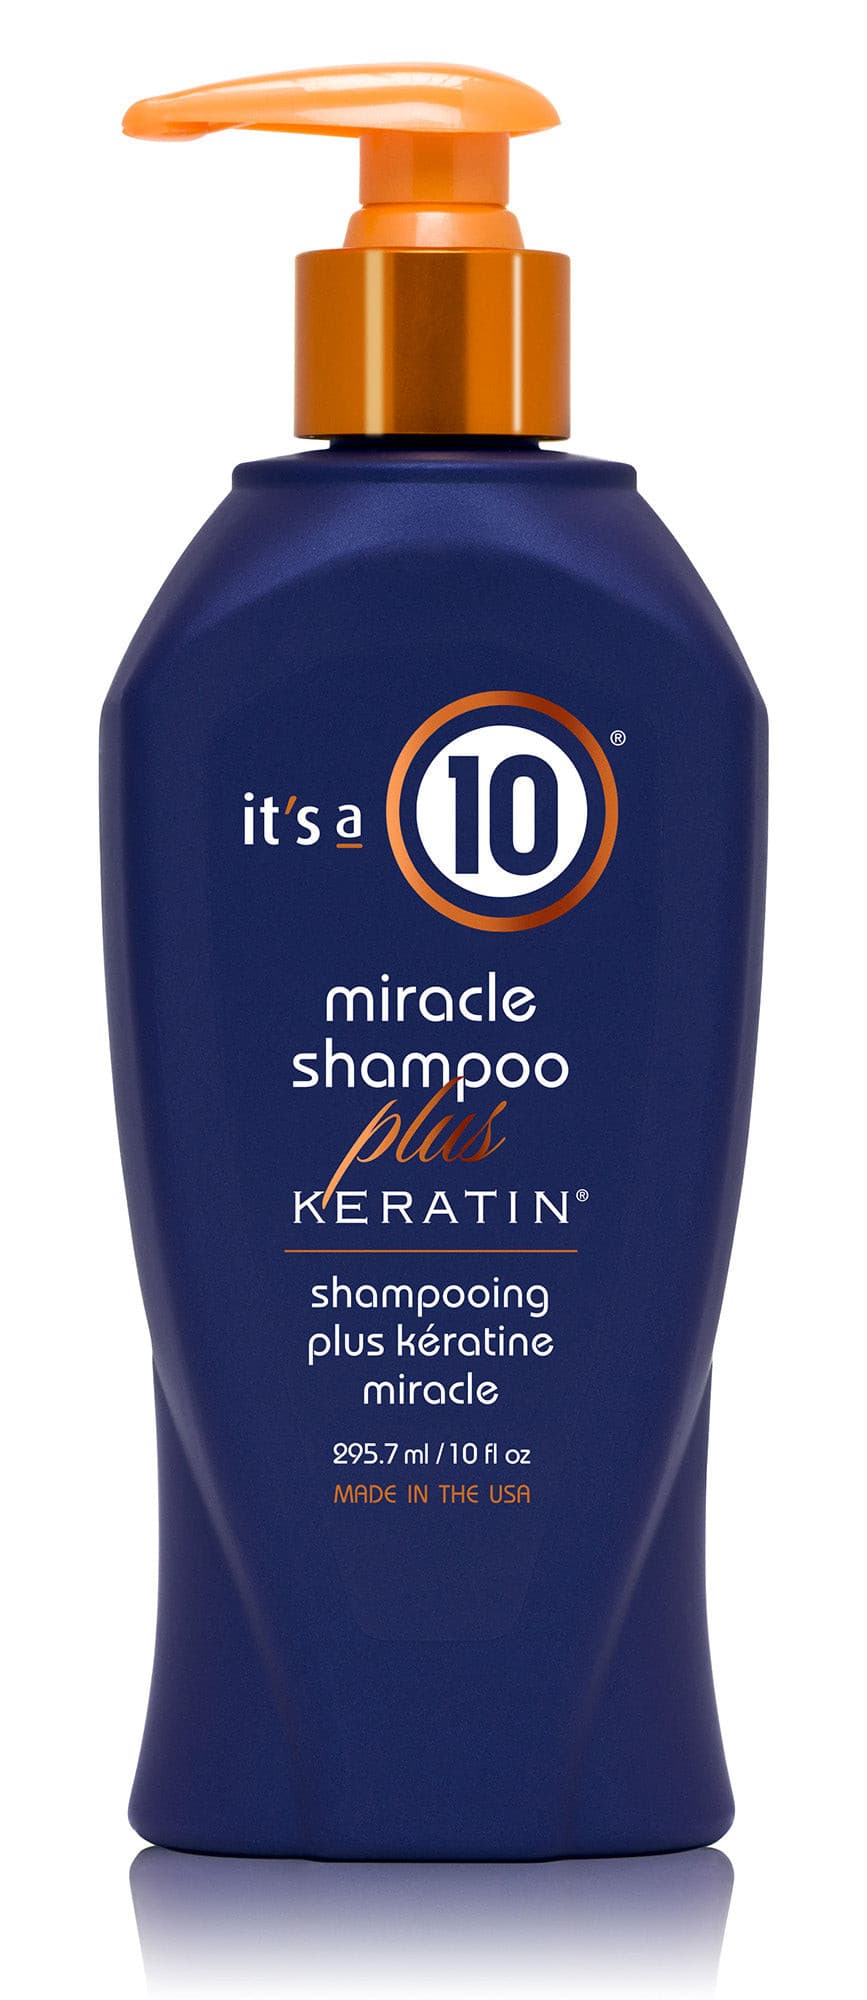 It's a 10 Miracle Shampoo Plus